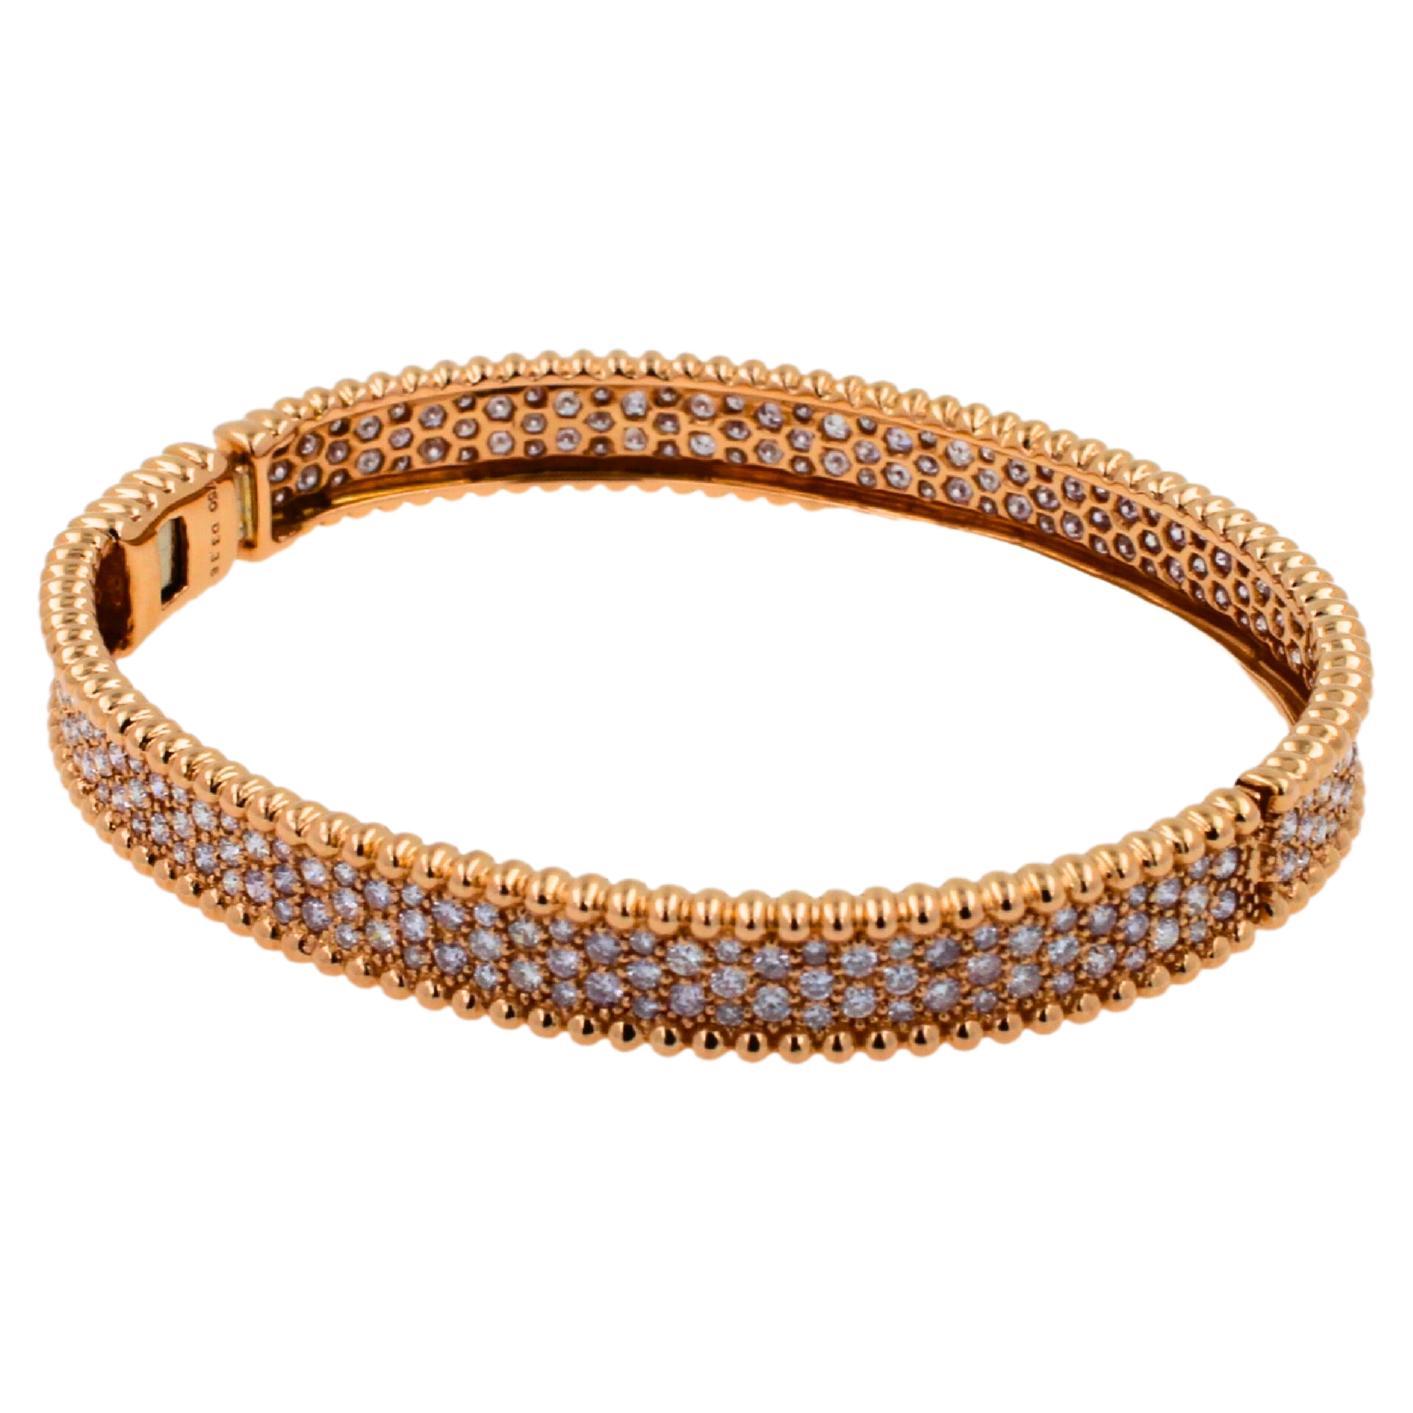 18K Rose Gold
3.36 ctw Diamond Weight
Diamond Quality E/VS1 
Solid Rose Gold Bangle with Hinge + Button Clasp/Closure Mechanism 
French Pave-Style Setting 
Honey Comb Pattern
Size - Inner Circumference: 7.5 Inches
Inner Oval Shape Dimensions: Length